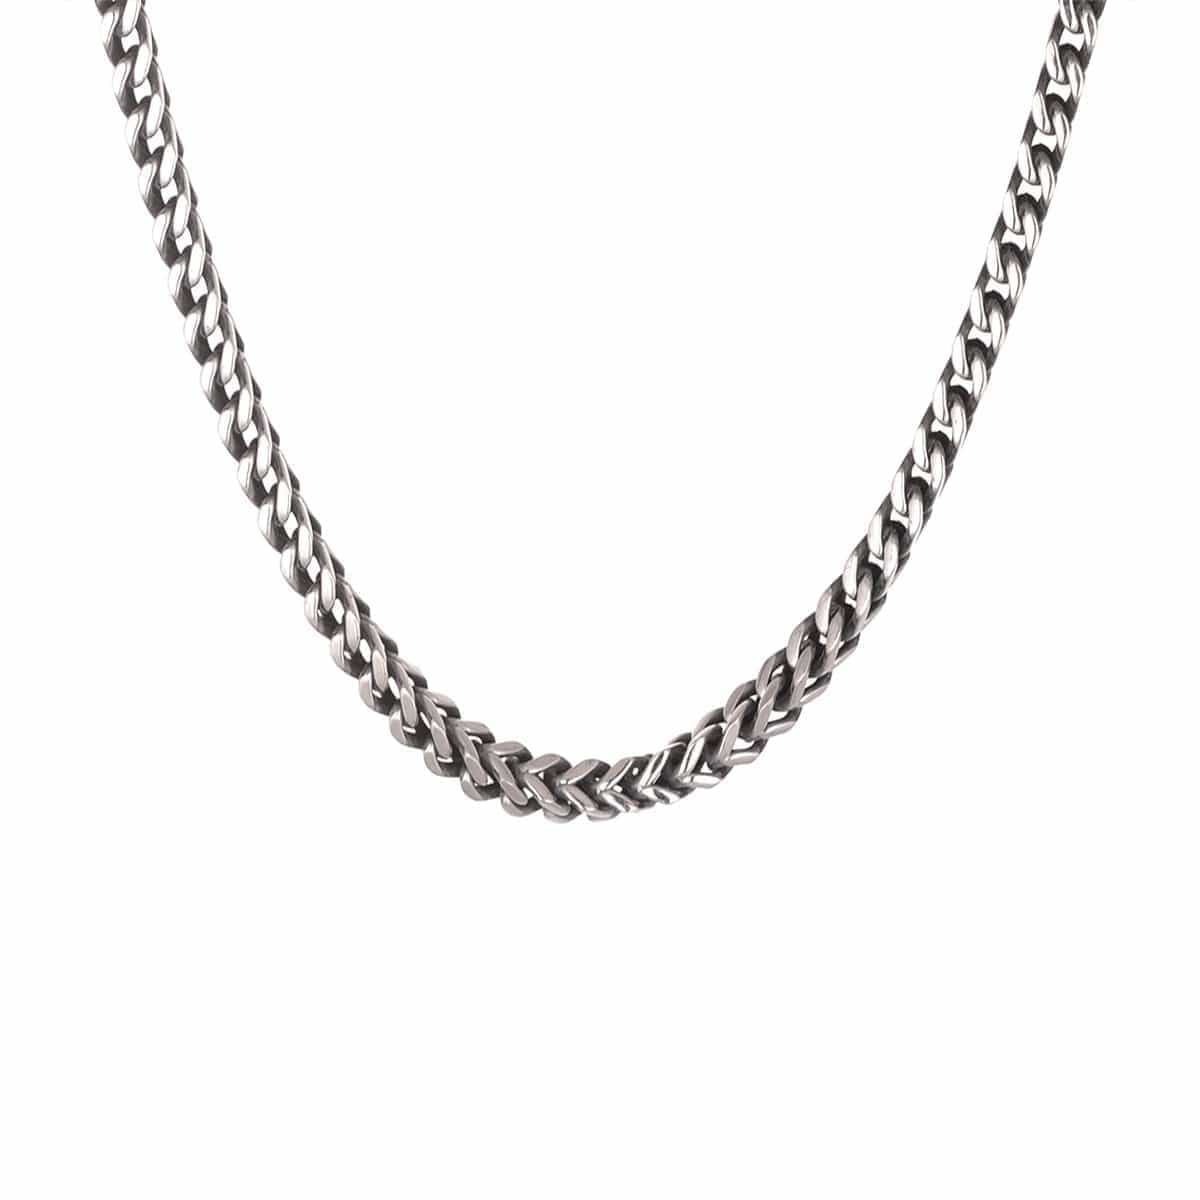 INOX JEWELRY Chains Antiqued Silver Tone Stainless Steel 5mm Franco Link Chain NSTC9236-20